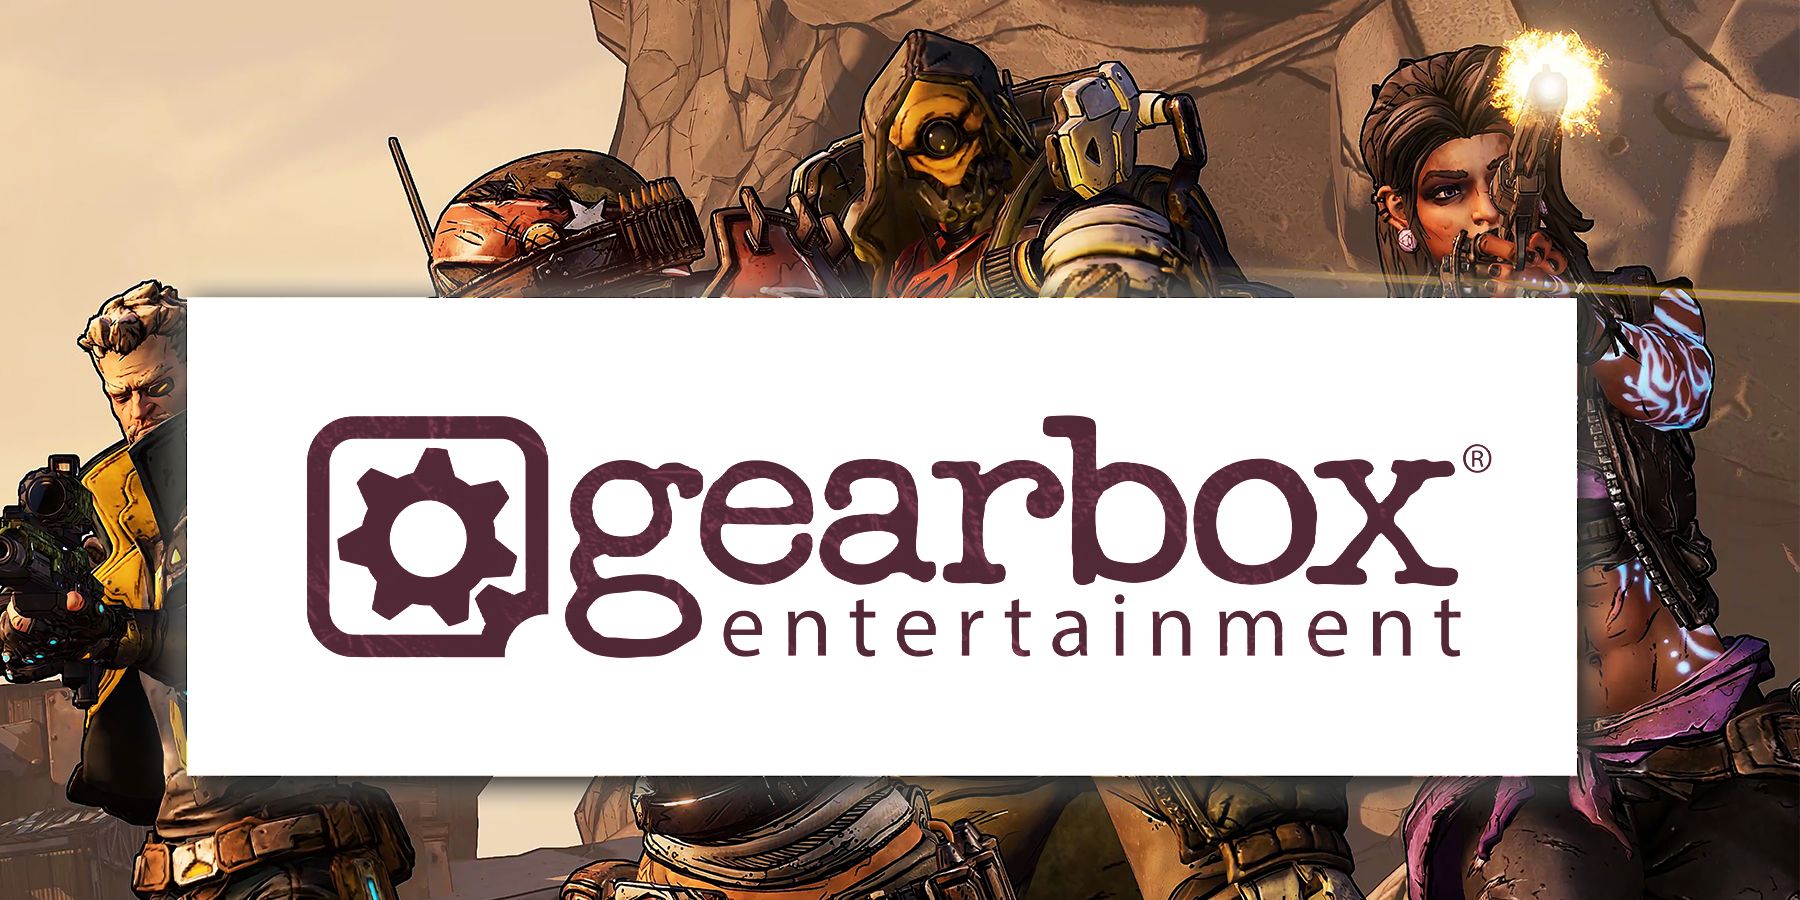 gearbox entertainment logo over borderlands 3 character lineup